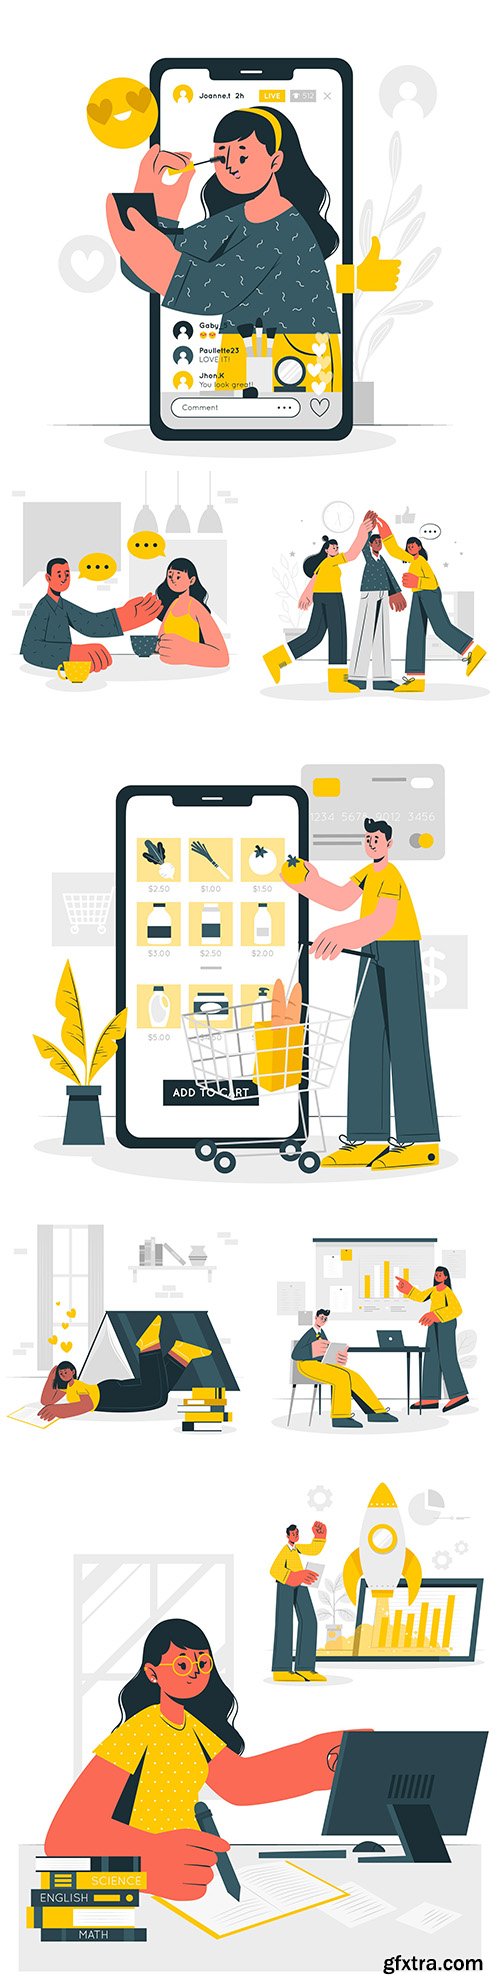 People online shop and learning concept illustration
